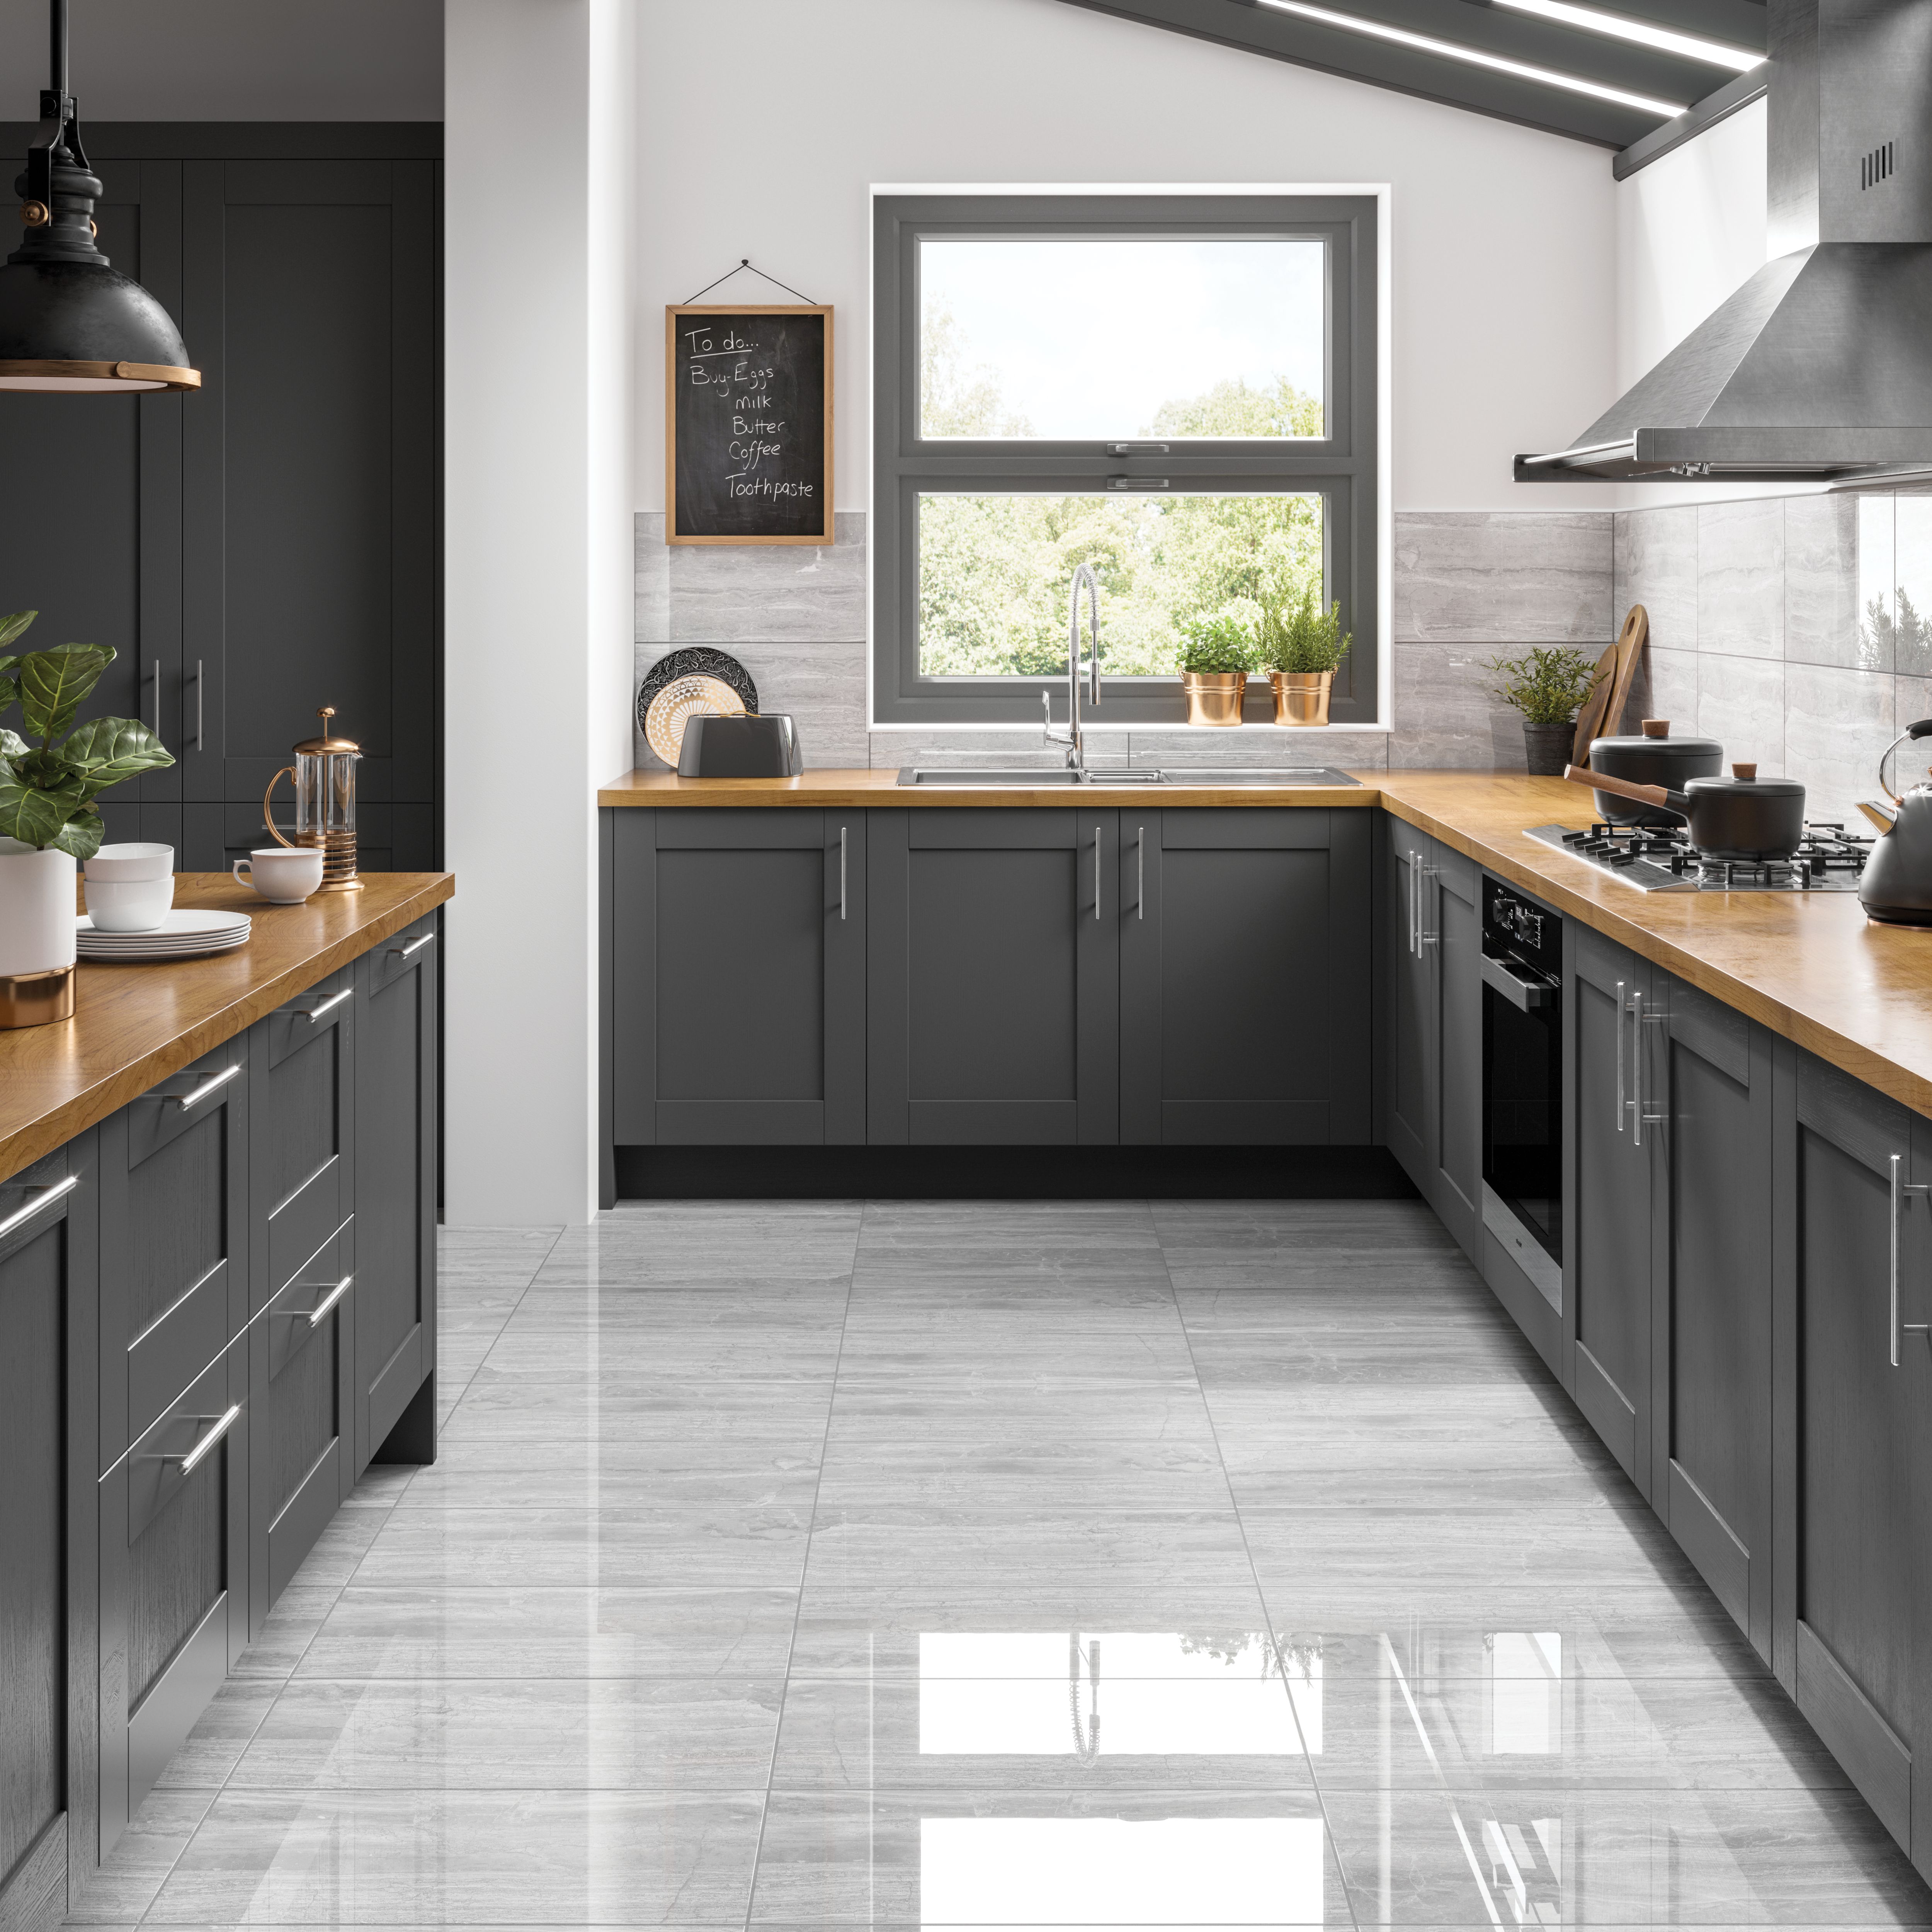 Image of Wickes Olympia™ Light Grey Polished Stone Porcelain Wall & Floor Tile - 600 x 300mm